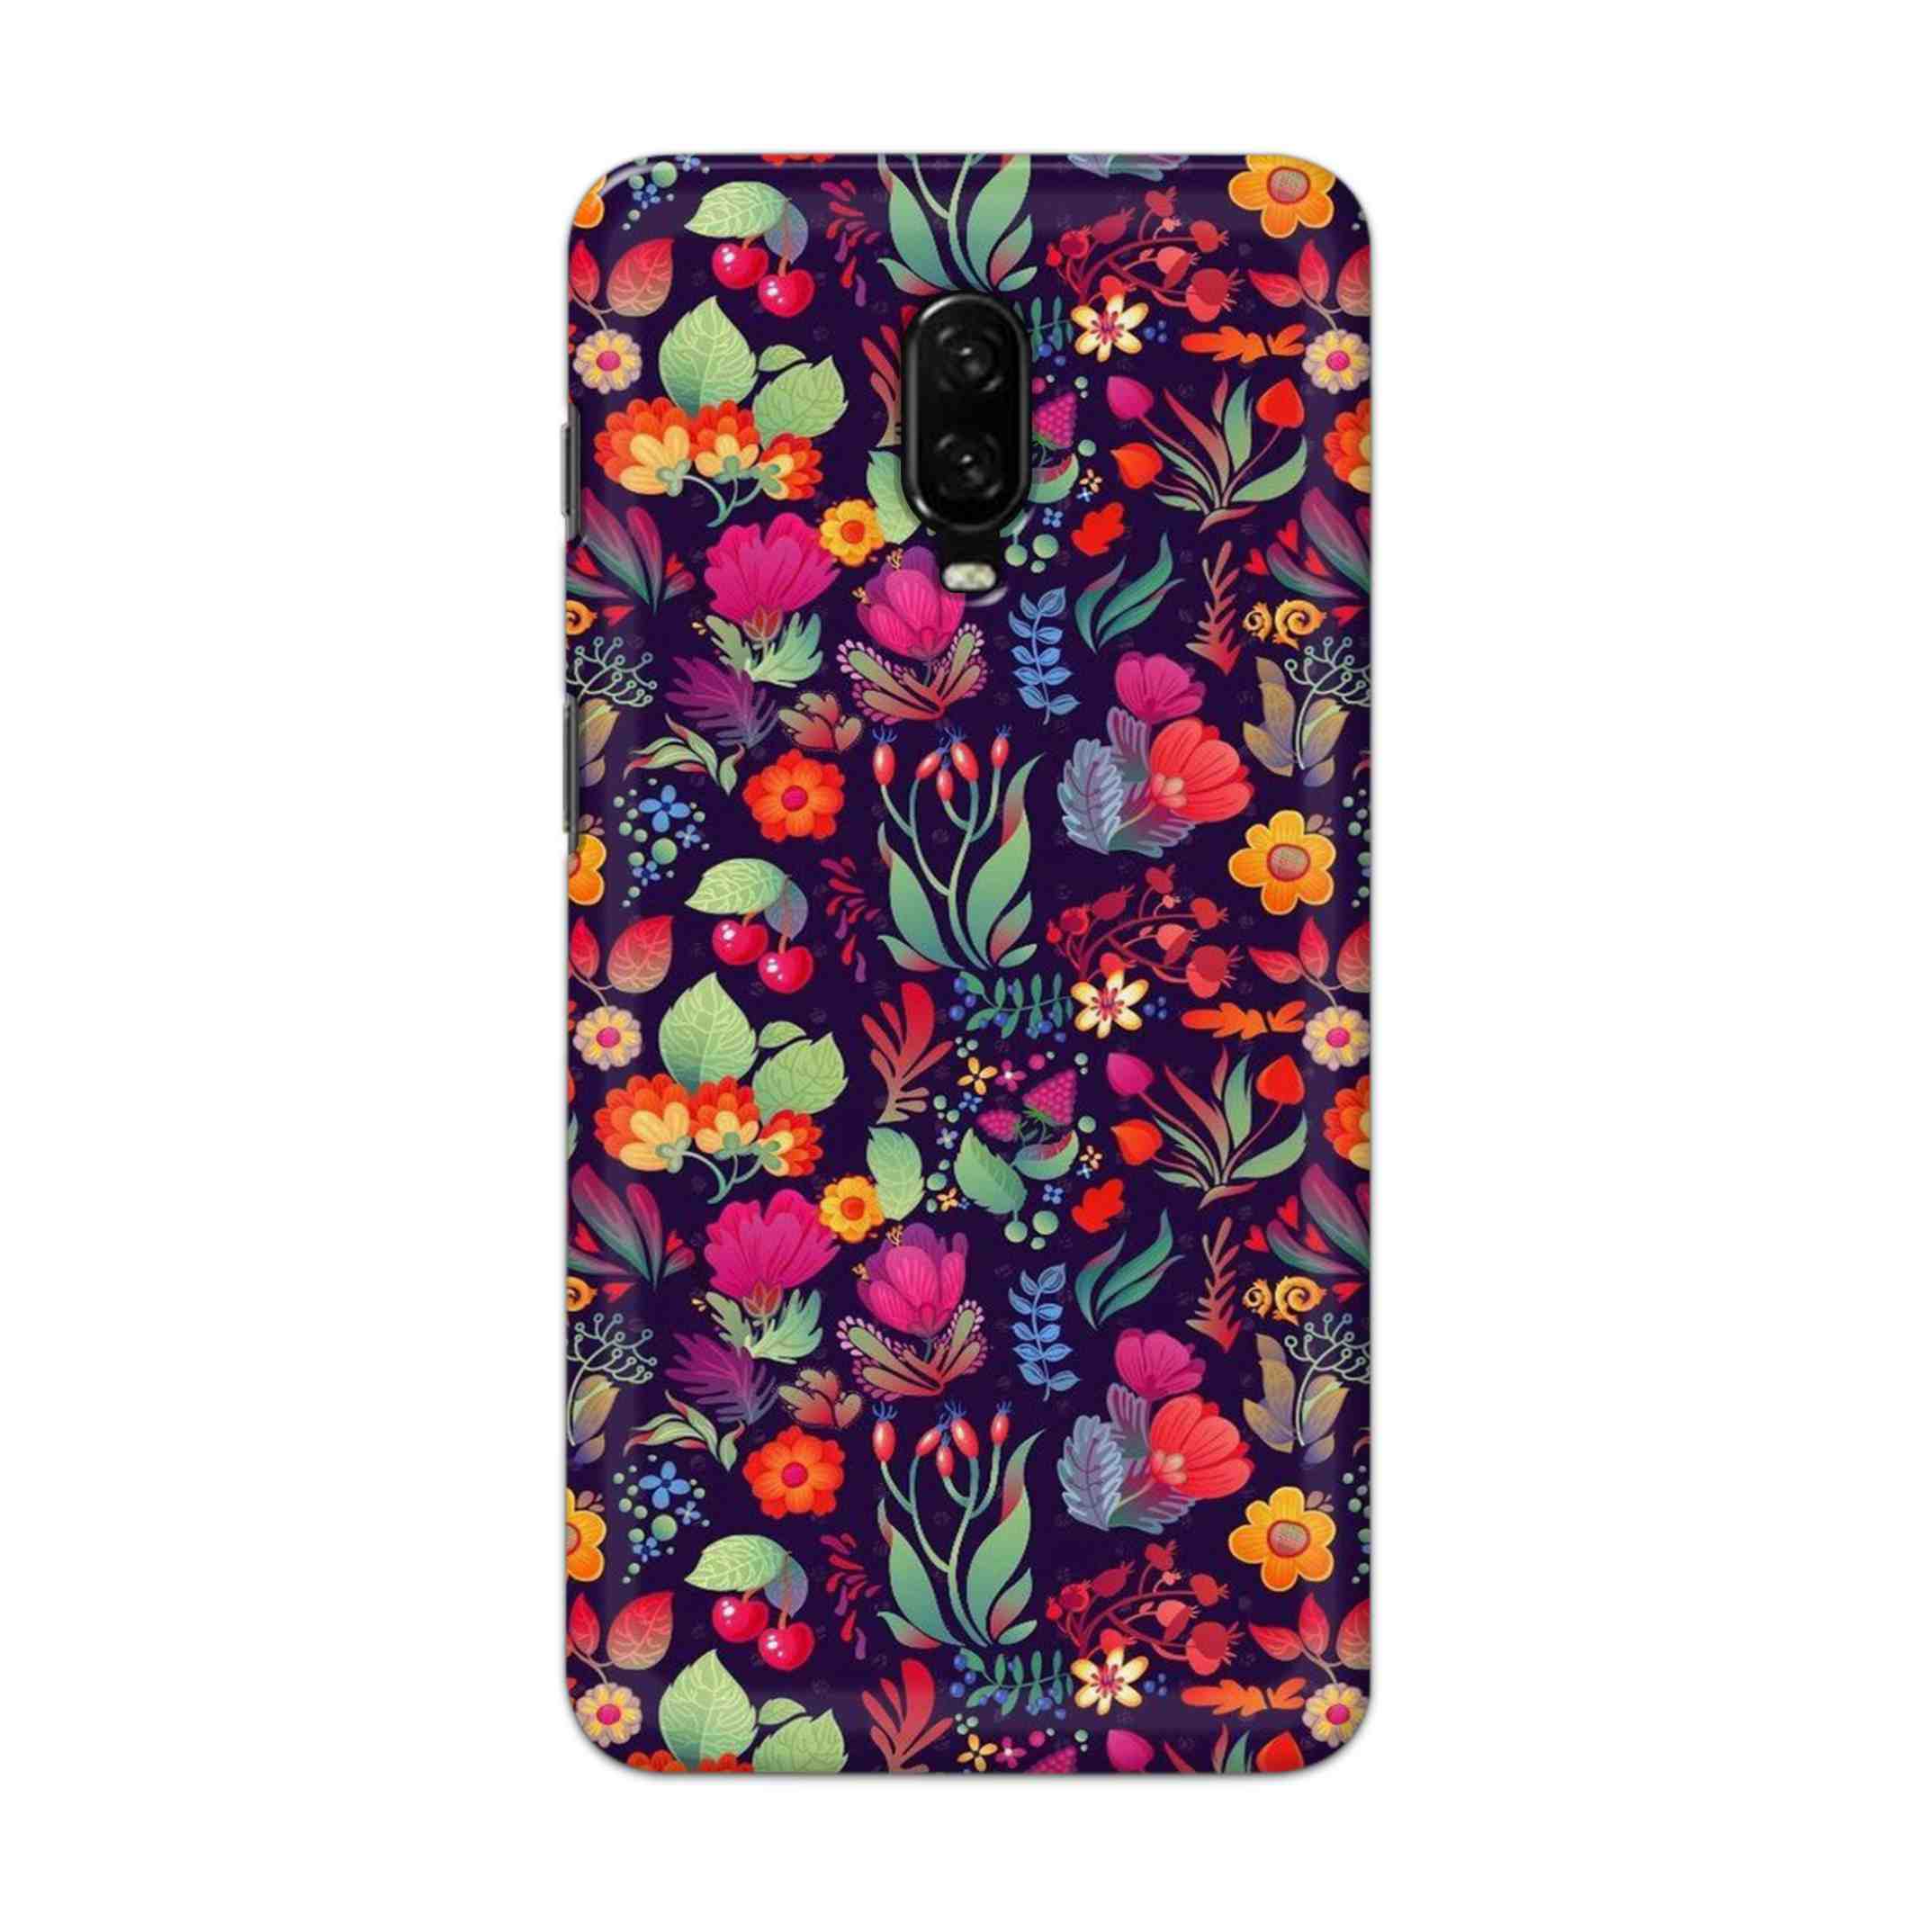 Buy Fruits Flower Hard Back Mobile Phone Case Cover For OnePlus 6T Online